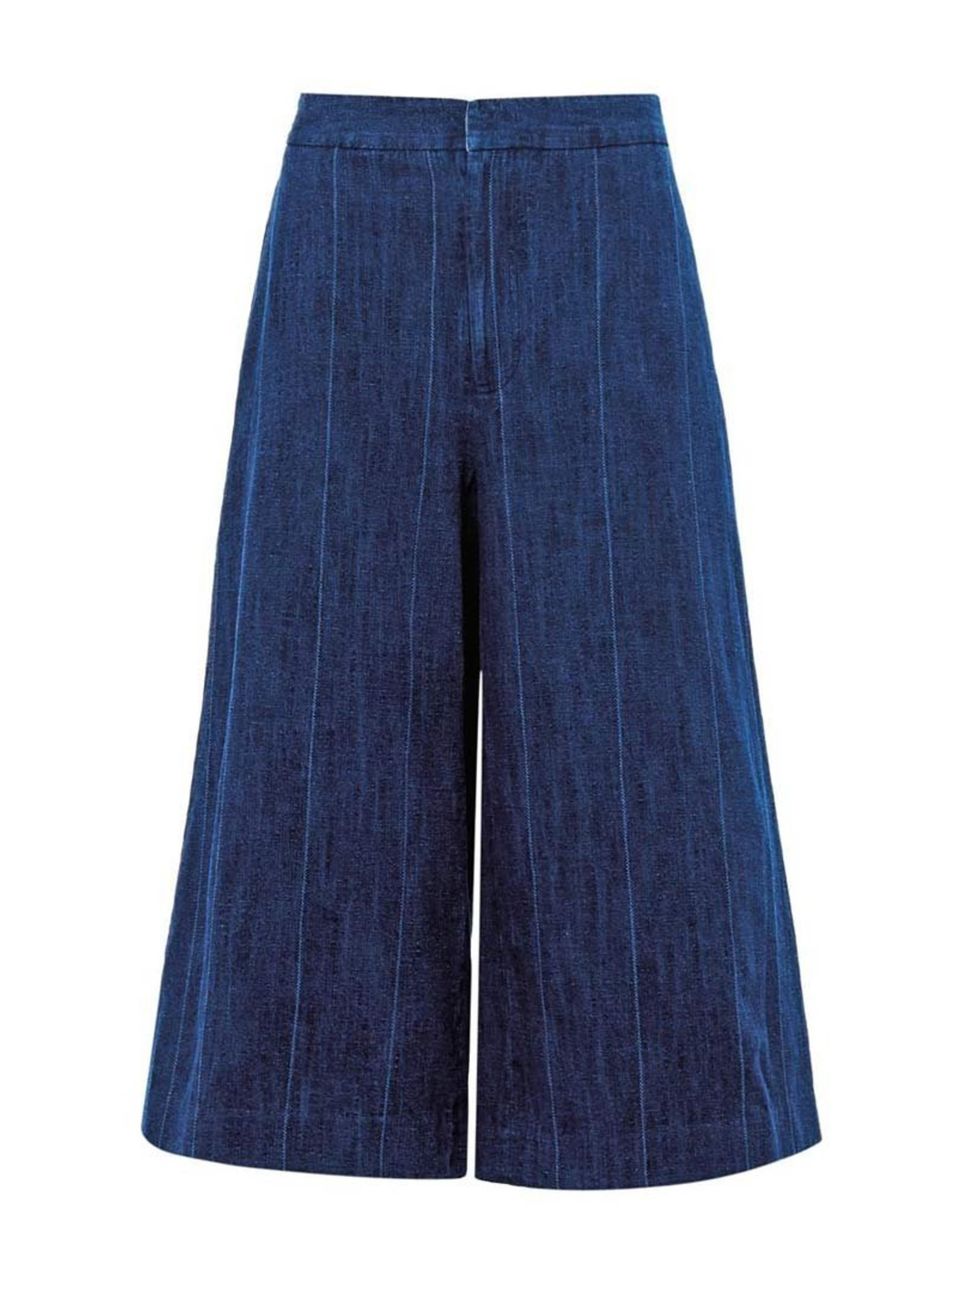 <p>Last week, the <a href="http://fashioncupboard.elleuk.com/article/9359/elle-meets-adam-lippes">ELLE fashion cupboard</a> played host to designer Adam Lippes and his wares - and these denim culottes were a stand-out piece.</p><p>Adam Lippes culottes, £6